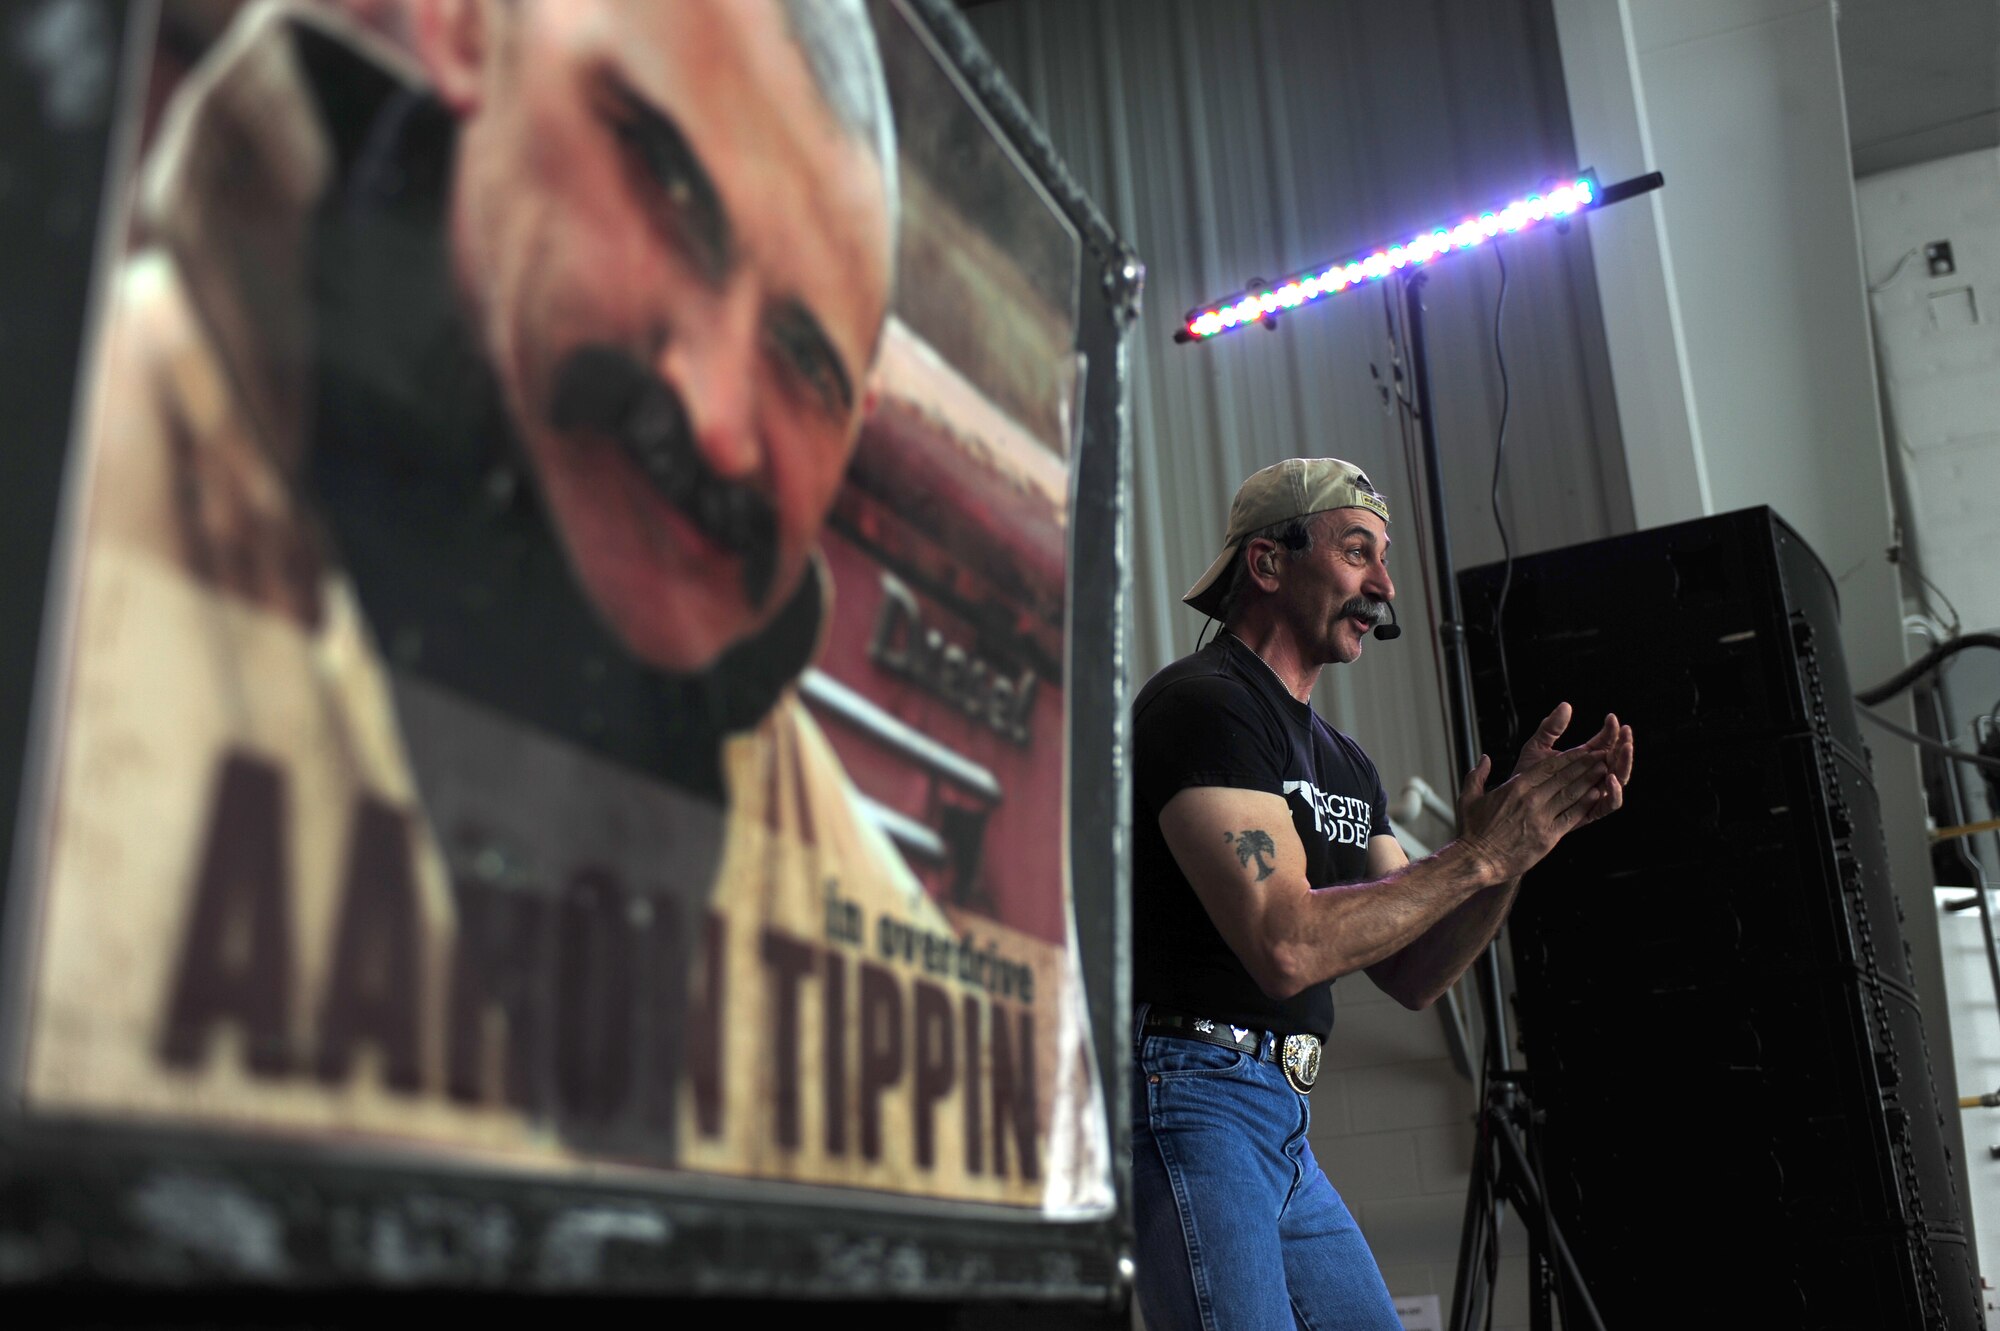 SEYMOUR JOHNSON AIR FORCE BASE, N.C. -- Country music star Aaron Tippin performs "Truck Drivin' Man" during the Wings Over Wayne Air Show and Open House here, April 16, 2011. Tippin built a bicycle to be donated to Toys for Tots during his performance. (U.S. Air Force photo/Senior Airman Rae Perry) (RELEASED)